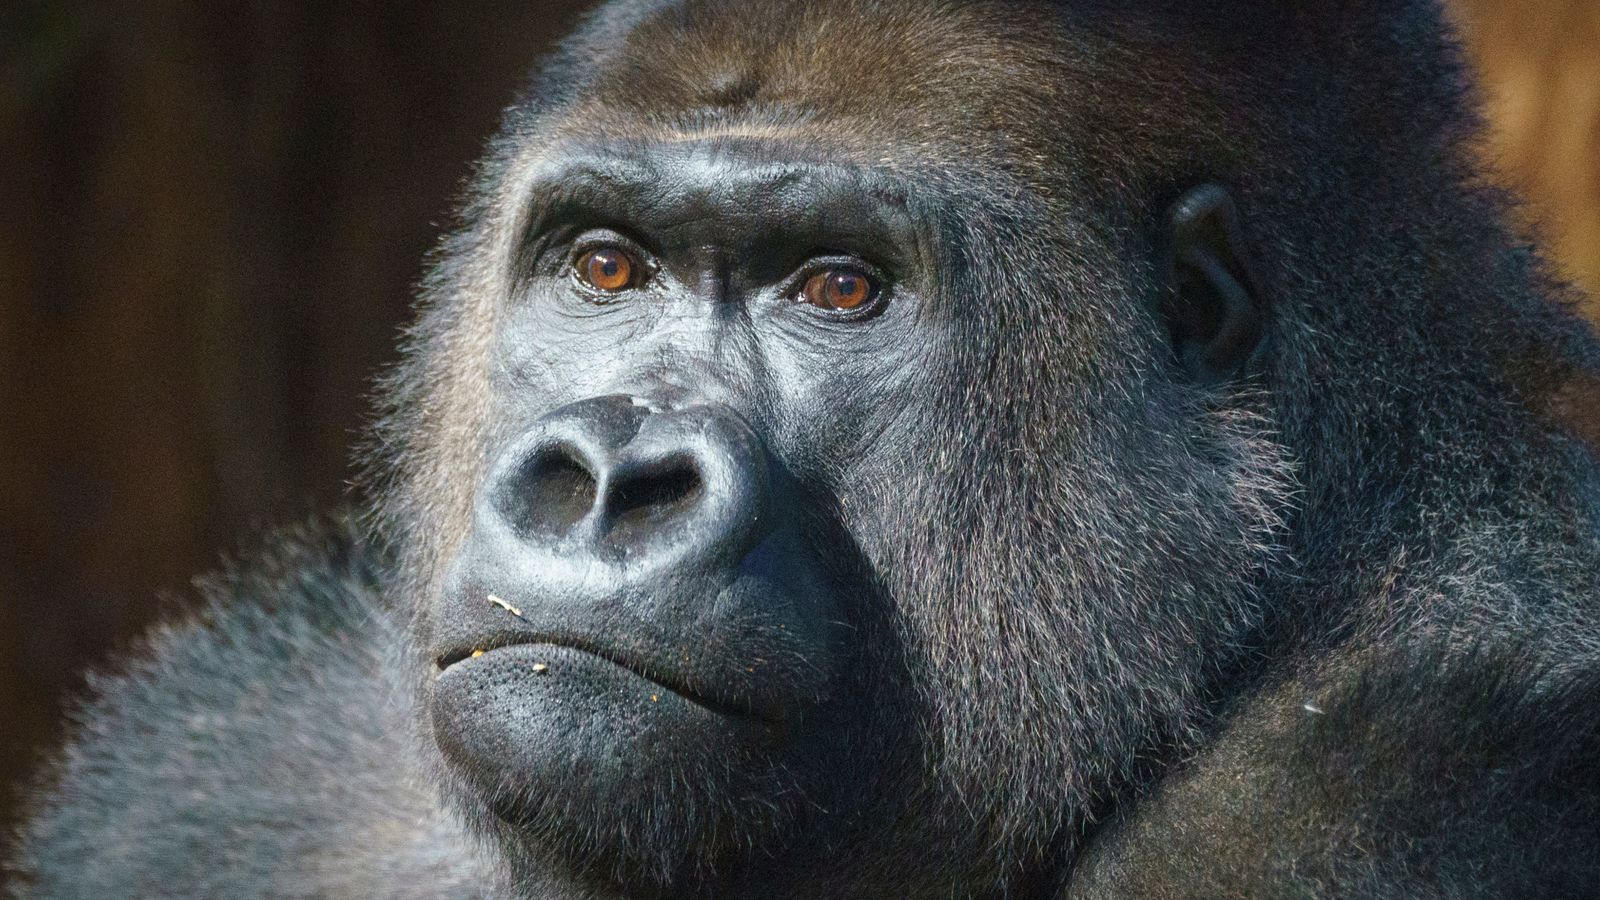 London Zoo welcomes new gorilla Kiburi just in time for Christmas